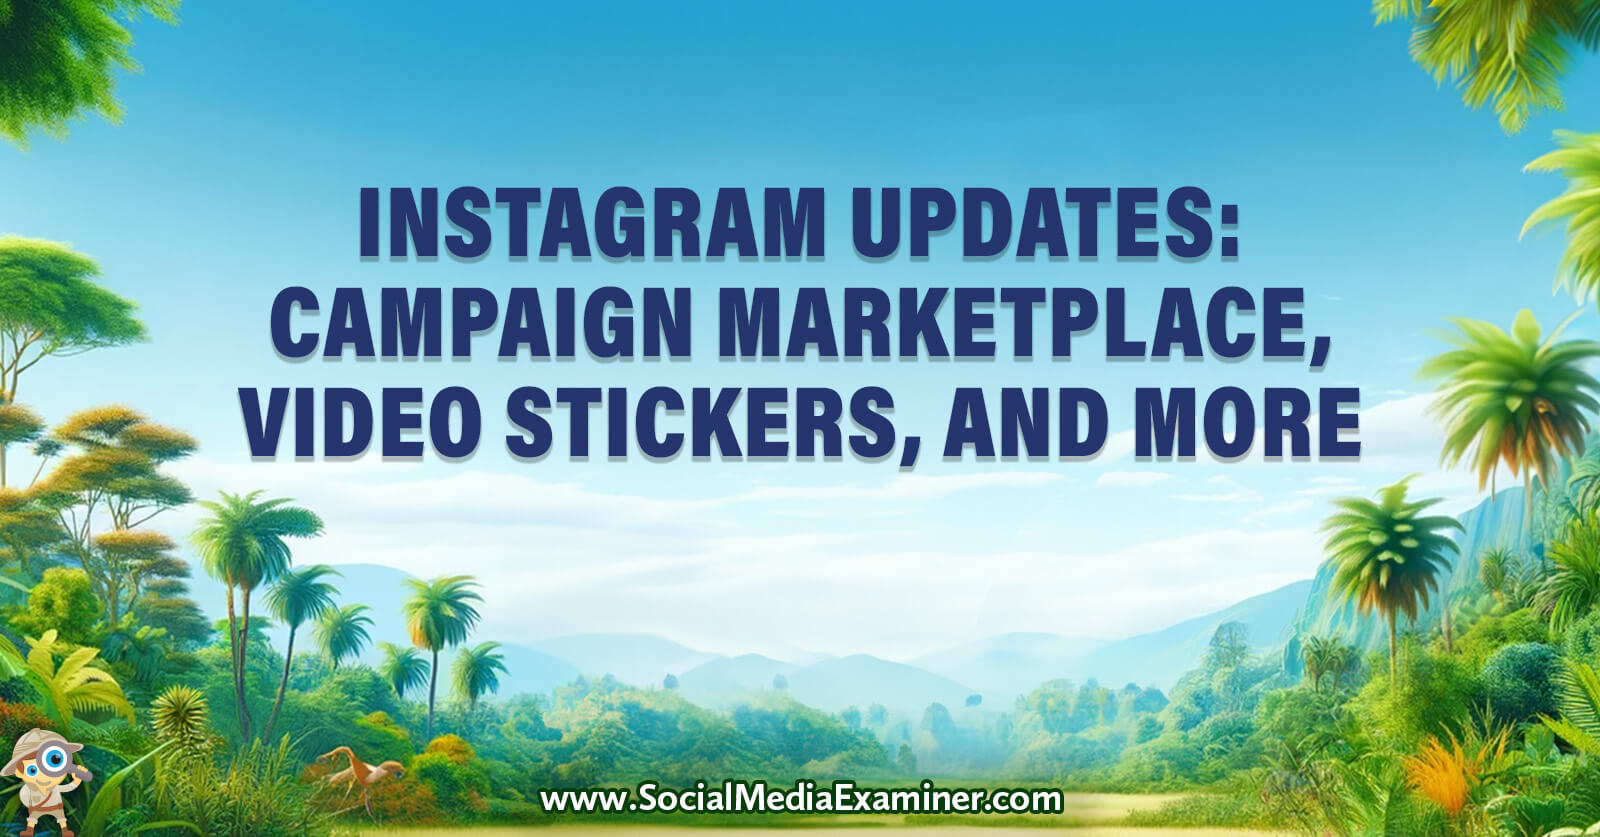 Instagram Updates: Video Stickers, Campaign Marketplace, and More by Social Media Examiner